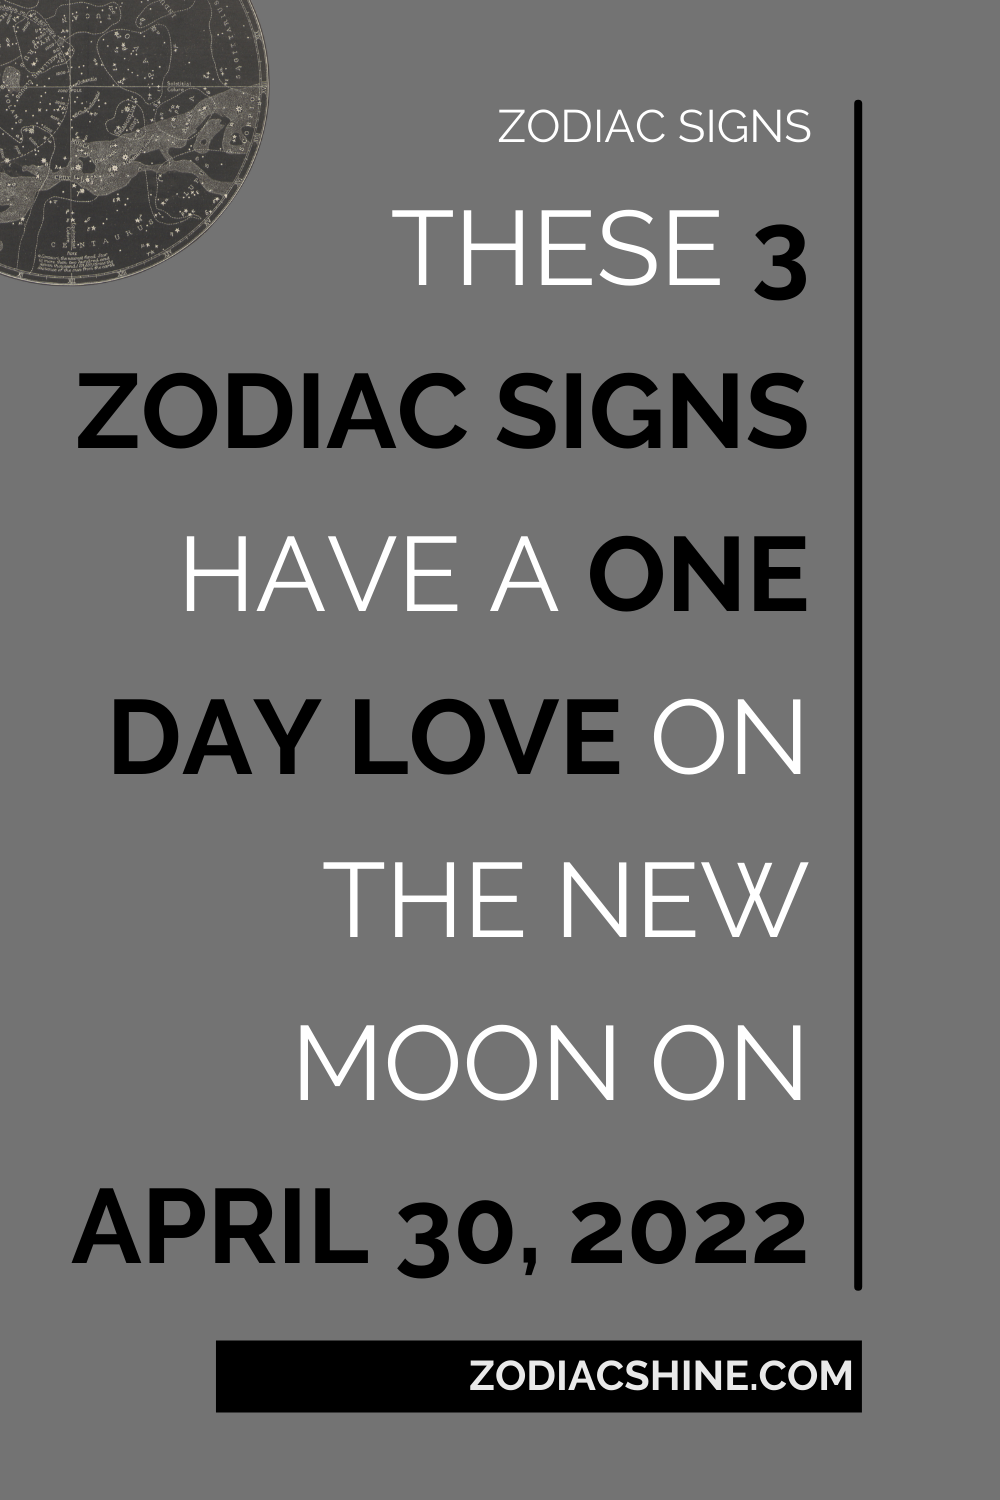 These 3 Zodiac Signs Have A One Day Love On The New Moon On April 30 2022